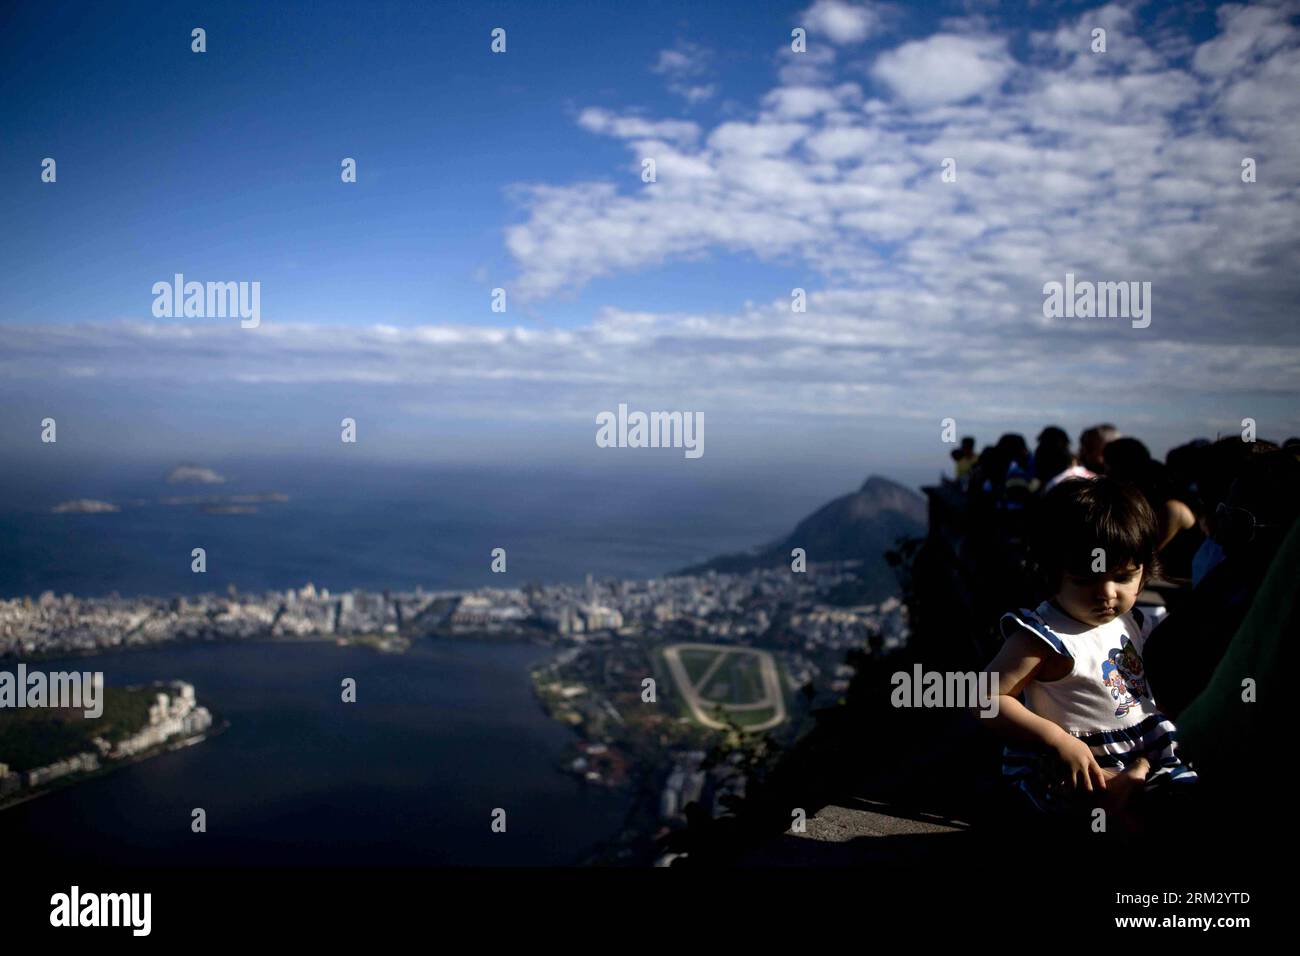 Bildnummer: 59919894  Datum: 29.06.2013  Copyright: imago/Xinhua (130630) -- RIO DE JANEIRO, June 29, 2013 (Xinhua) -- Tourists visit the statue of Christ the Redeemer on Corcovado Mountain, in Rio de Janeiro, Brazil, on June 29, 2013. Brazil will face Spain on Sunday during the final of the FIFA Confederation Cup Brazil 2013. (Xinhua/Guillermo Arias) (itm) (SP)BRAZIL-RIO DE JANEIRO-CONFEDERATIONS-CORCOVADO-SERIE PUBLICATIONxNOTxINxCHN Gesellschaft xas x0x 2013 quer     59919894 Date 29 06 2013 Copyright Imago XINHUA  Rio de Janeiro June 29 2013 XINHUA tourists Visit The Statue of Christ The r Stock Photo